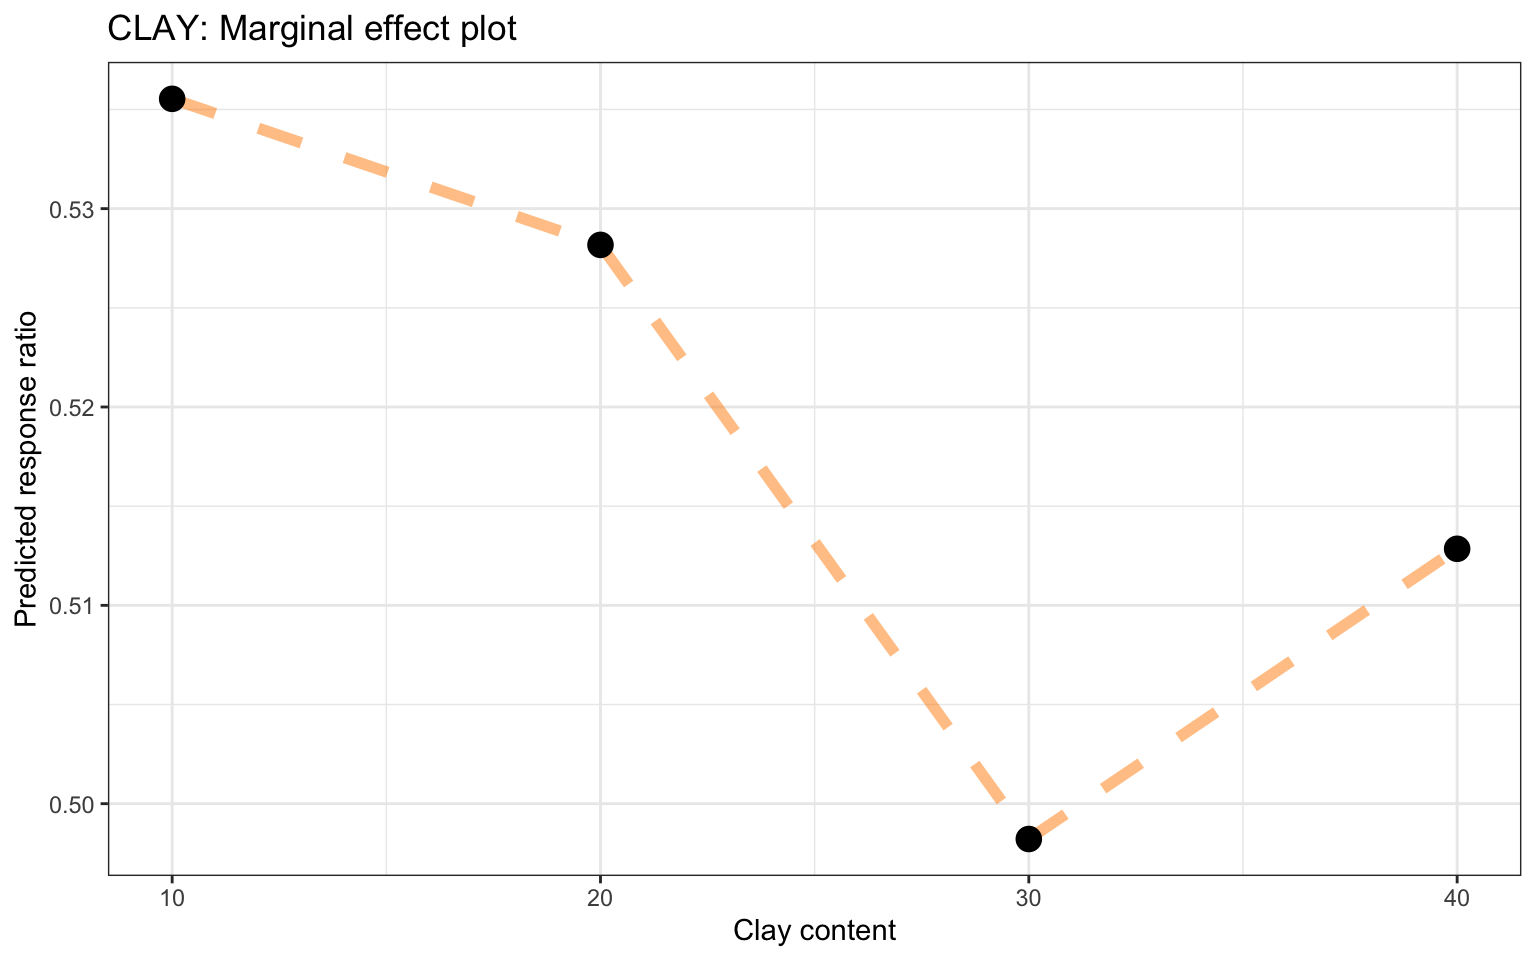 Marginal effects plot for clay content based on the RF model